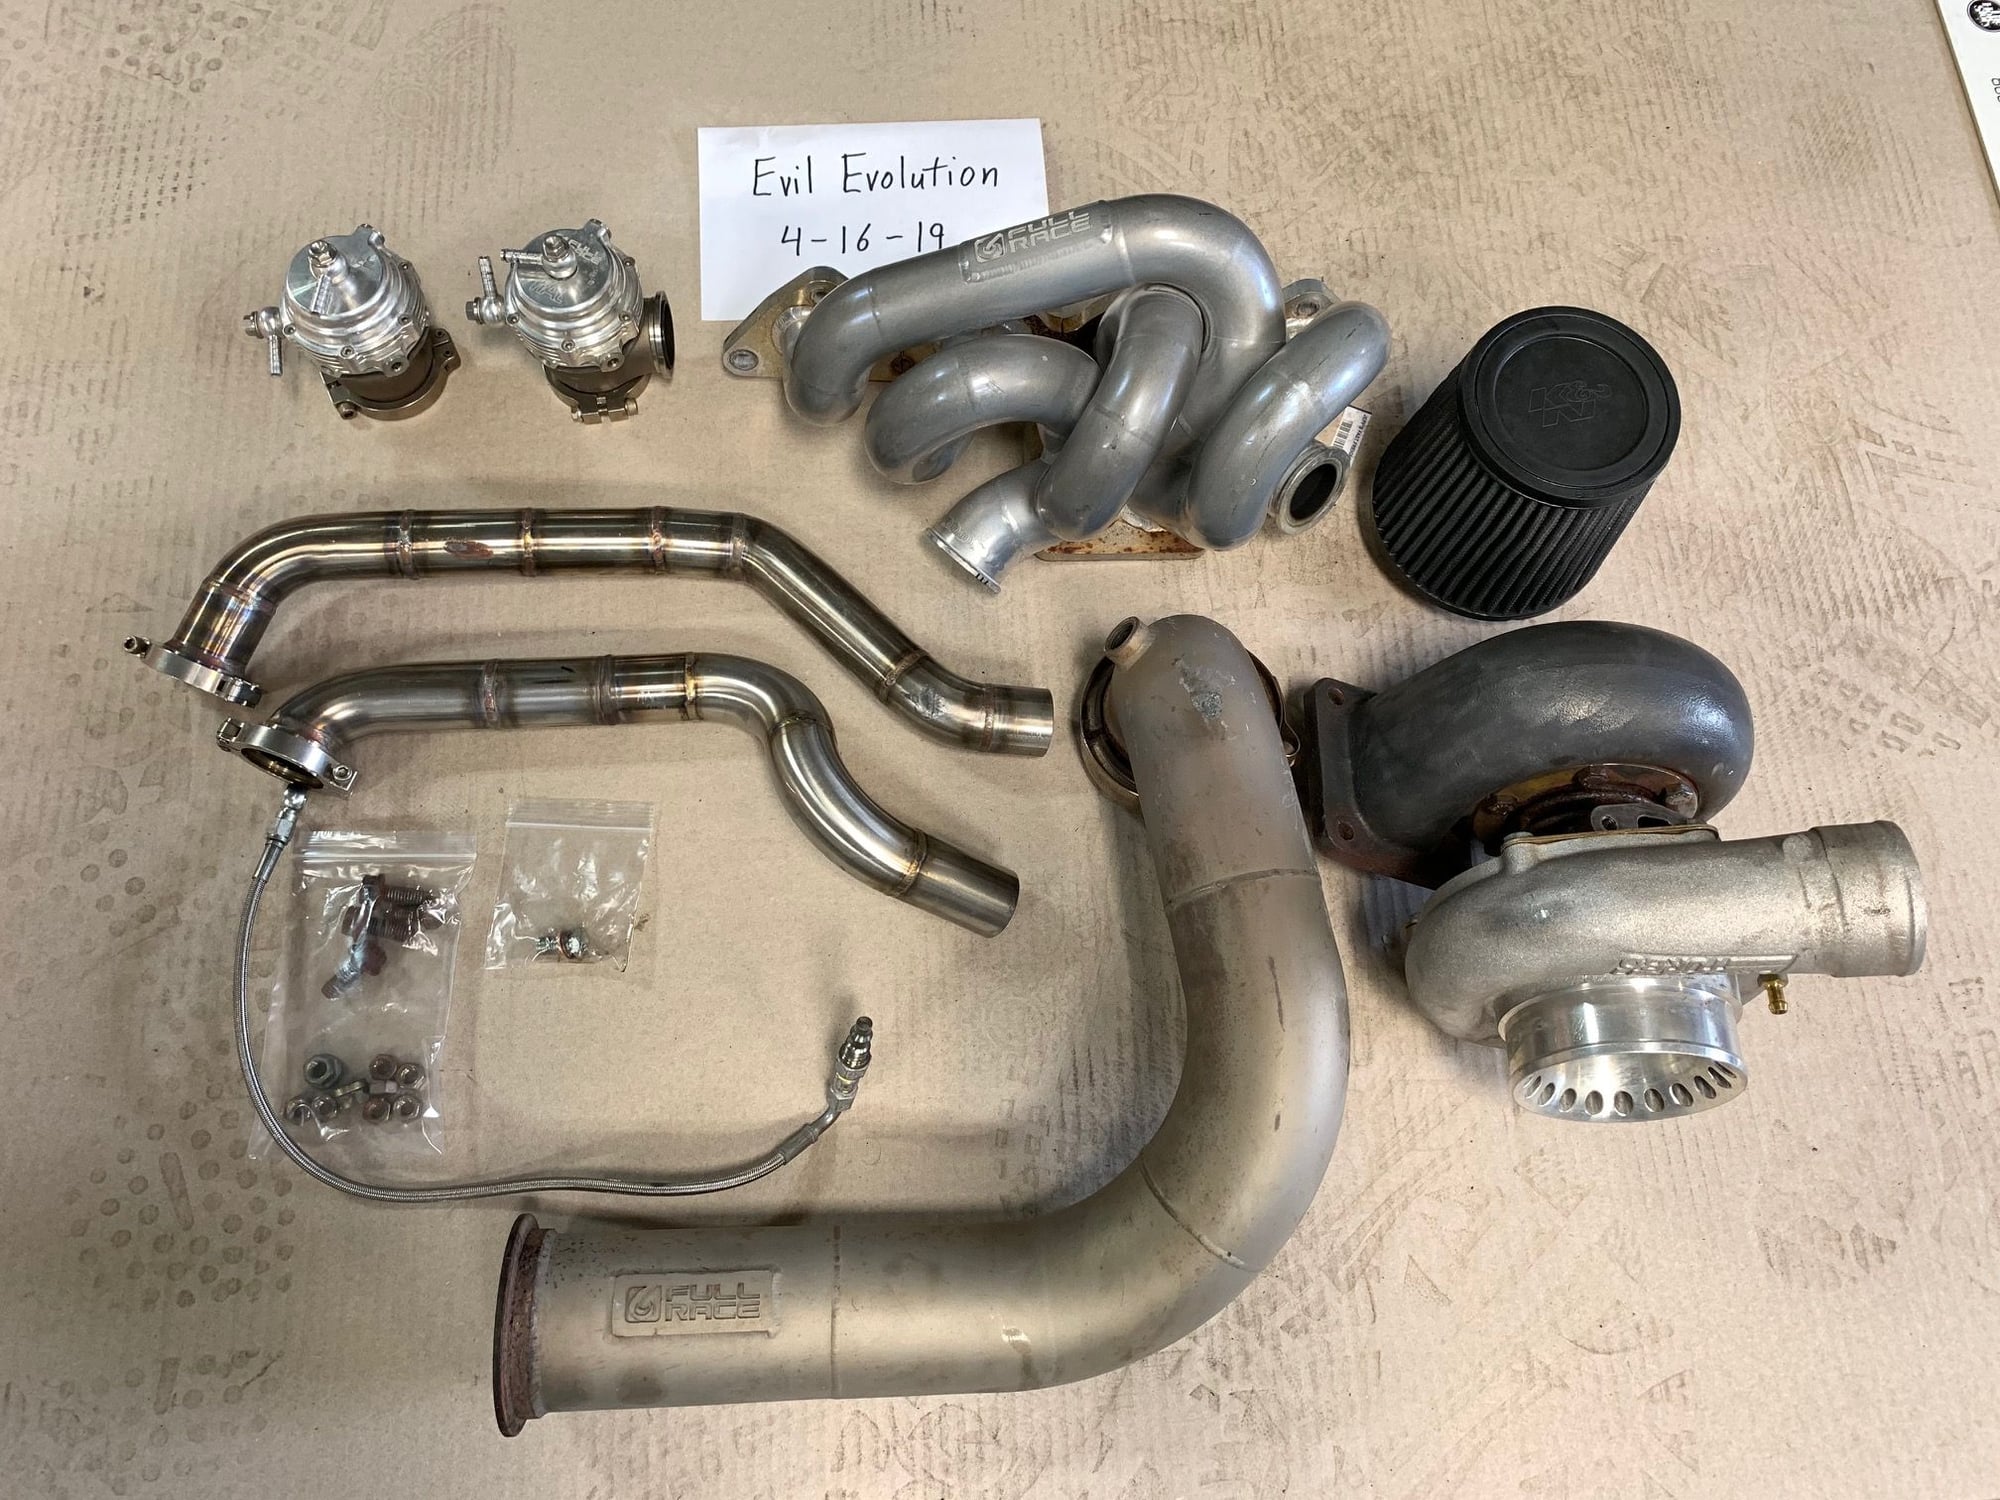 Engine - Power Adders - Full Race T4 Twin Scroll 6466 BB Turbo Kit - Used - 2003 to 2007 Mitsubishi Lancer Evolution - Milwaukee, WI 53202, United States